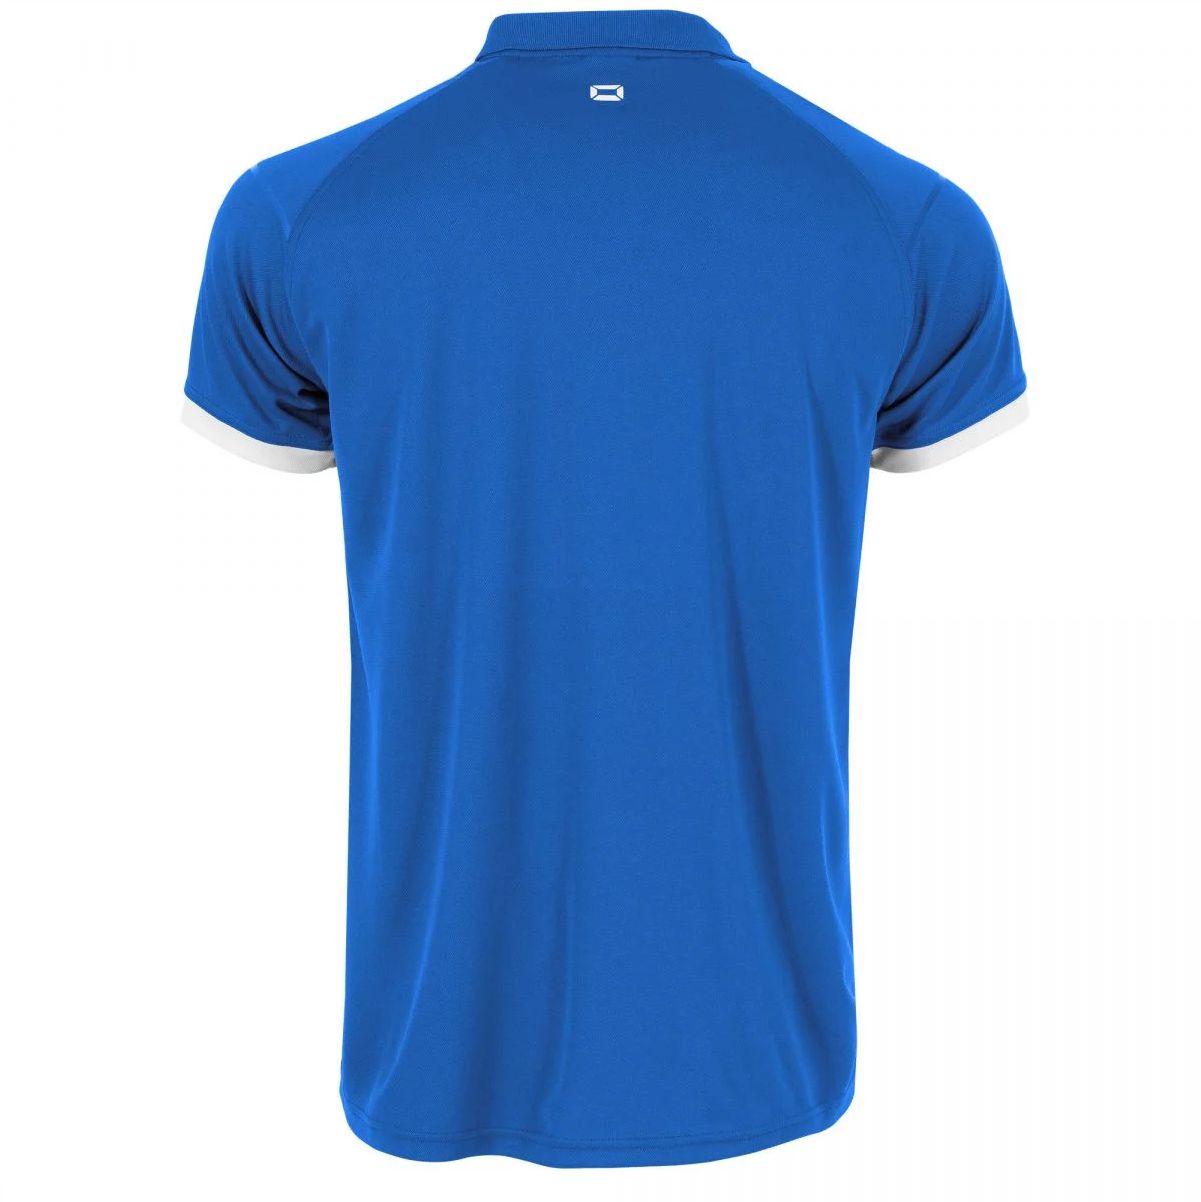 Stanno - First Polo - Royal - Adult